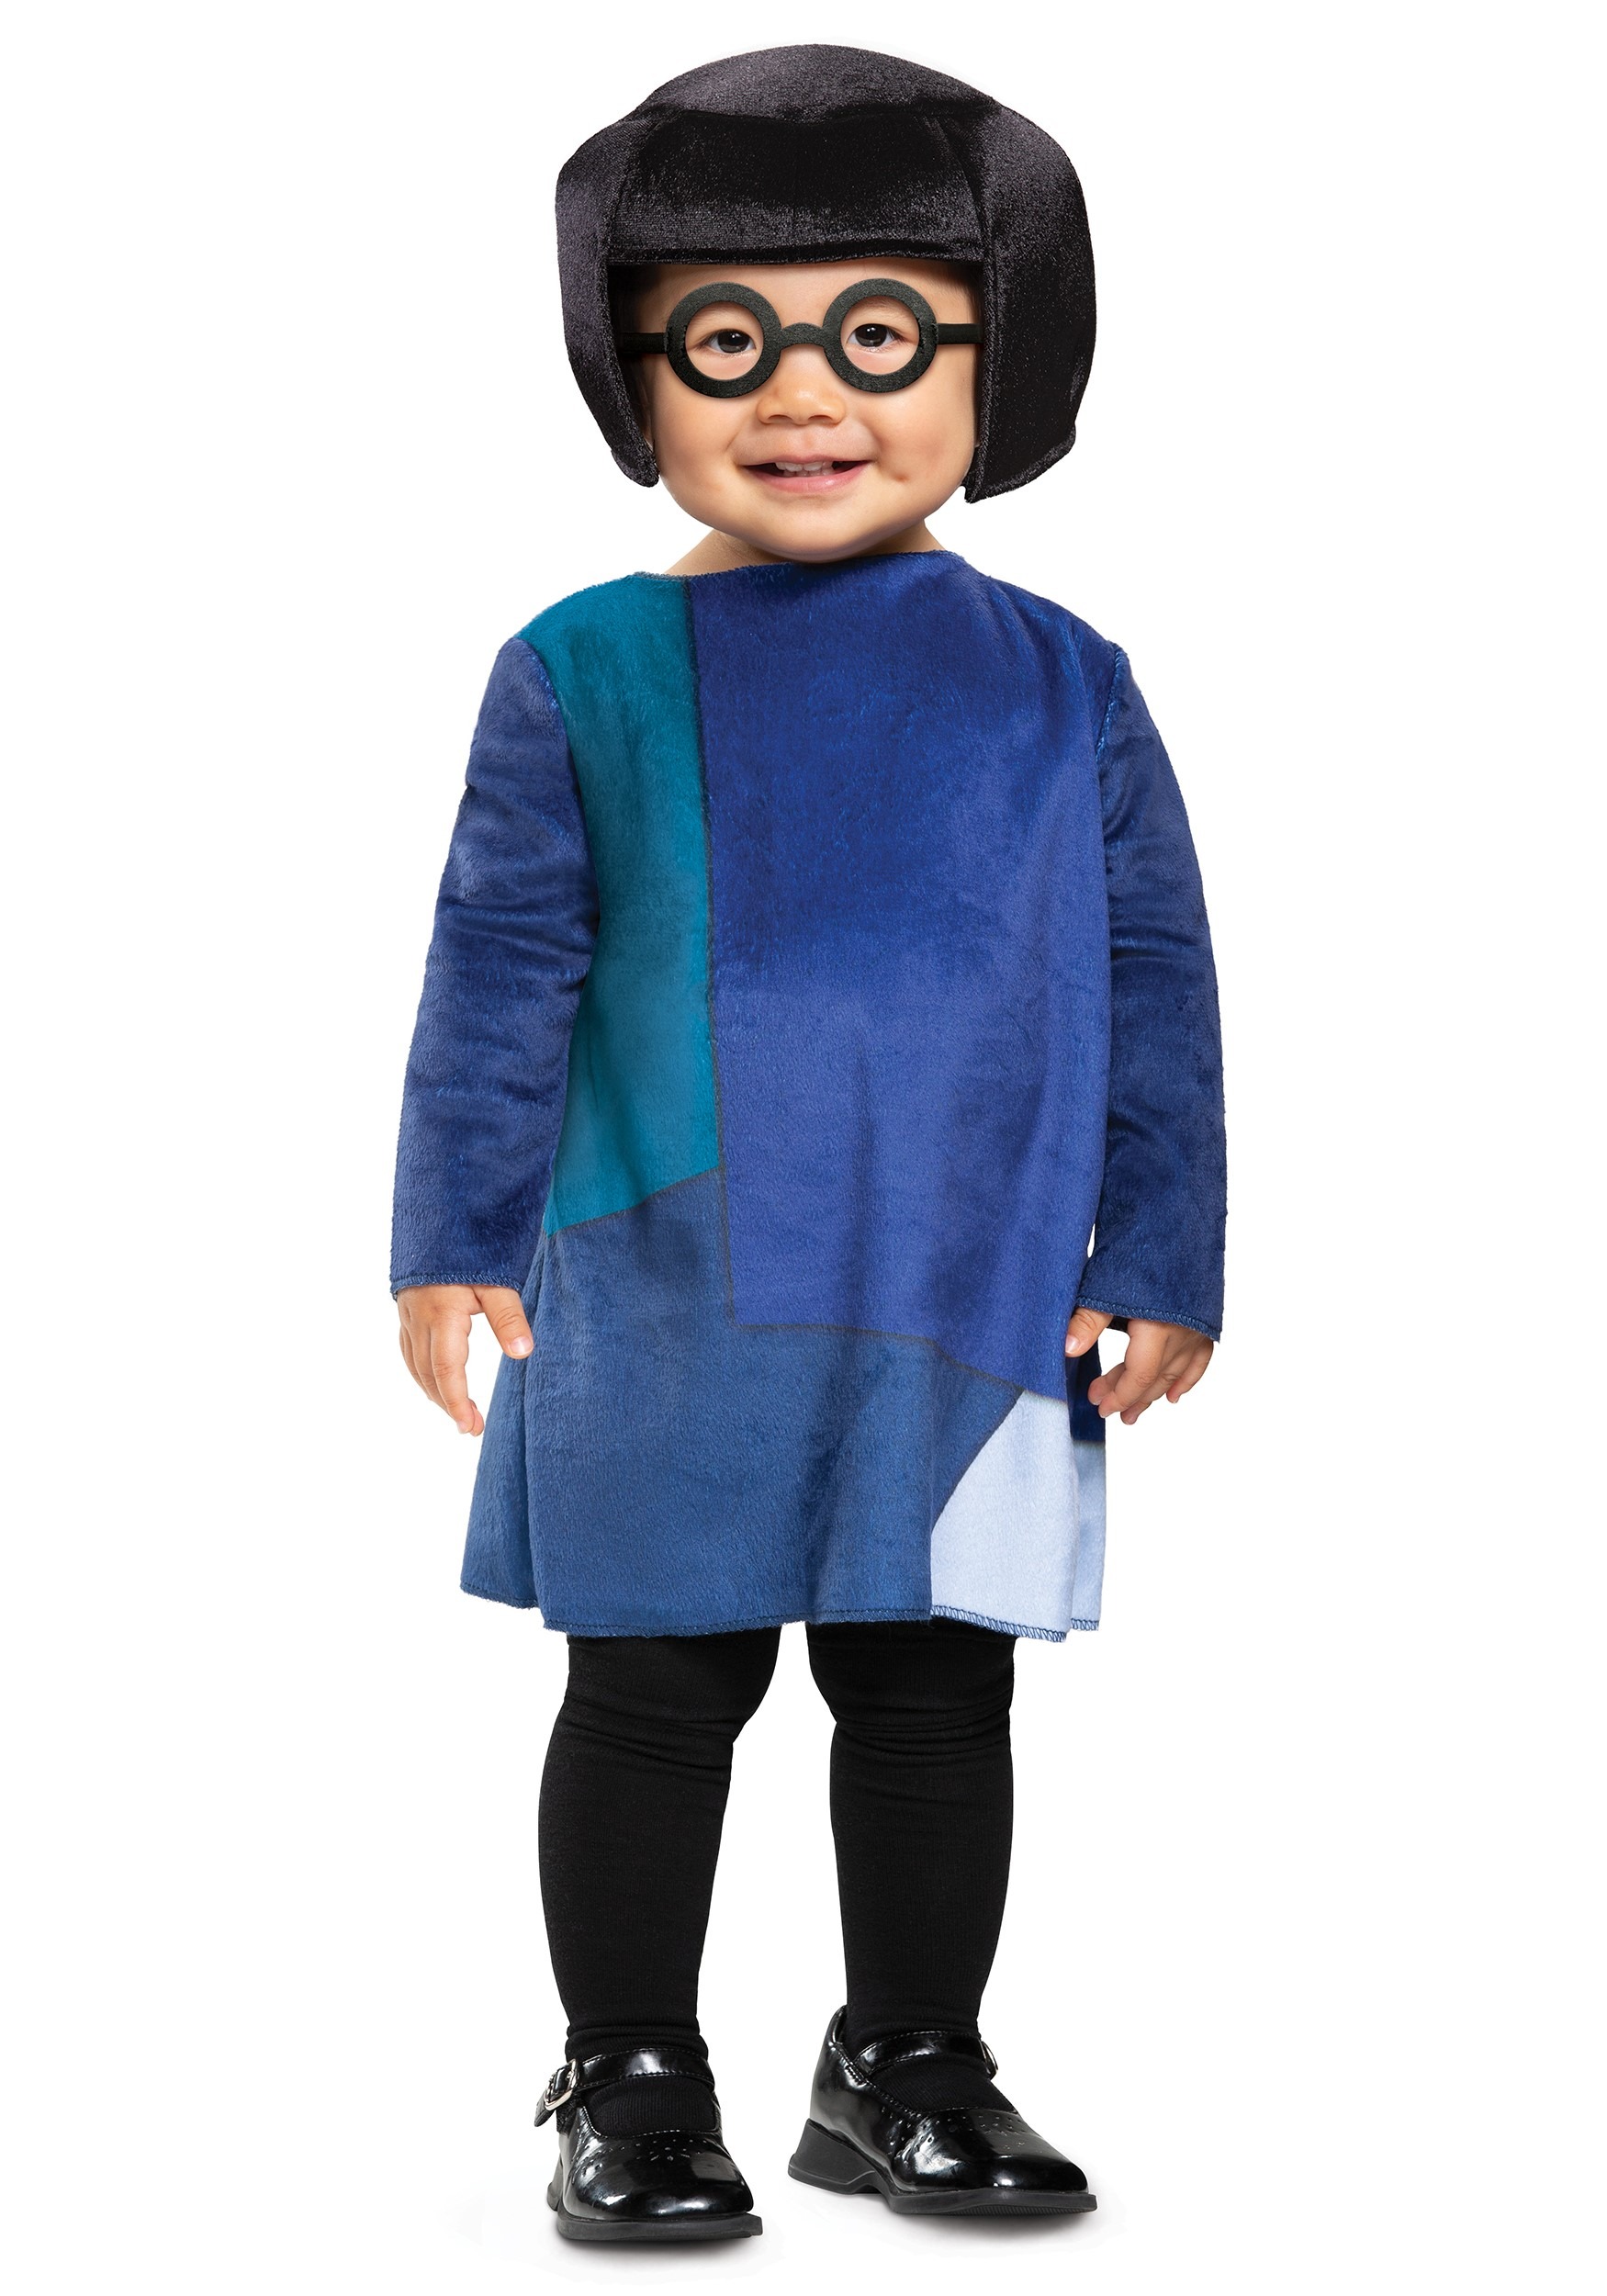 Toddler Edna Costume The Incredibles